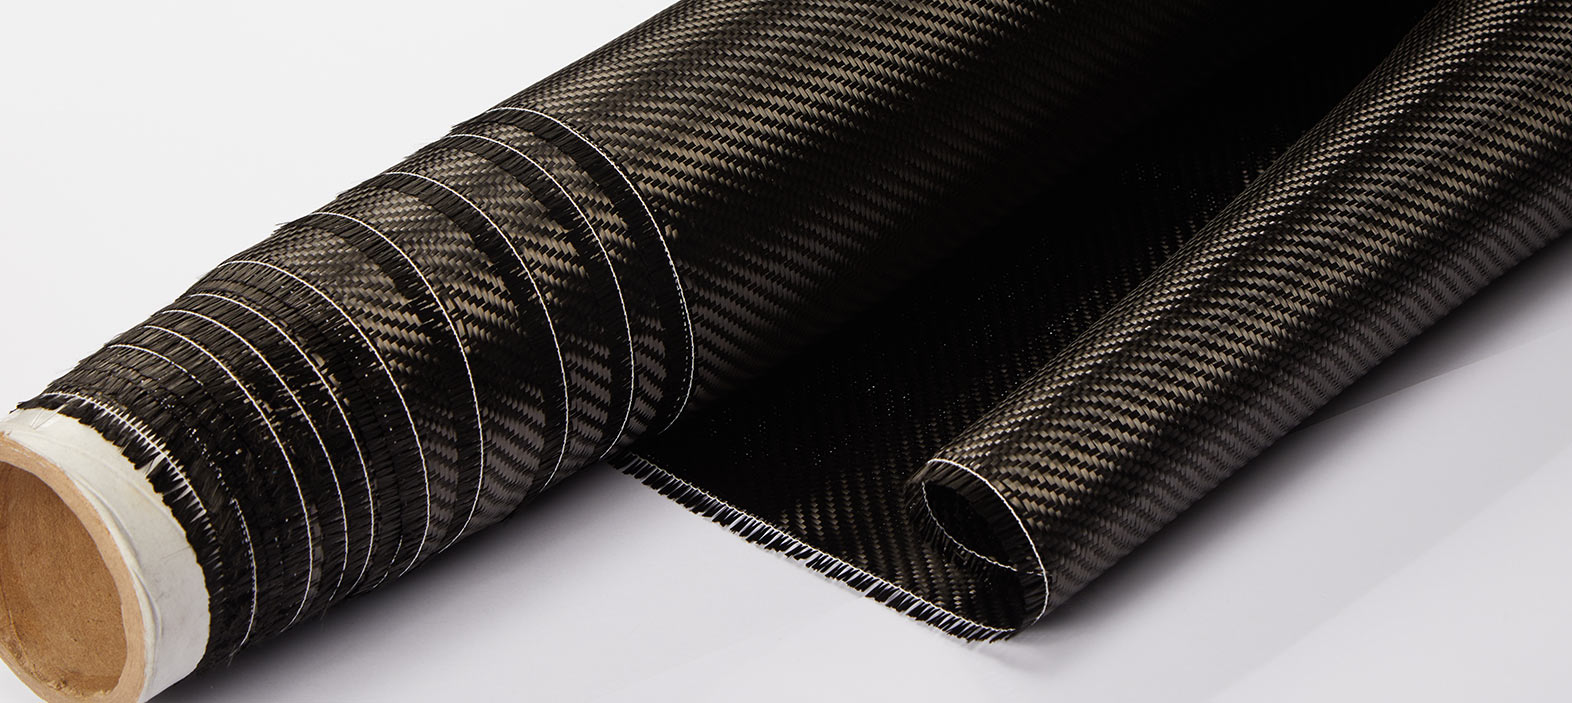 Why Epoxy Resin Is Used In Manufacturing Carbon Fiber Products